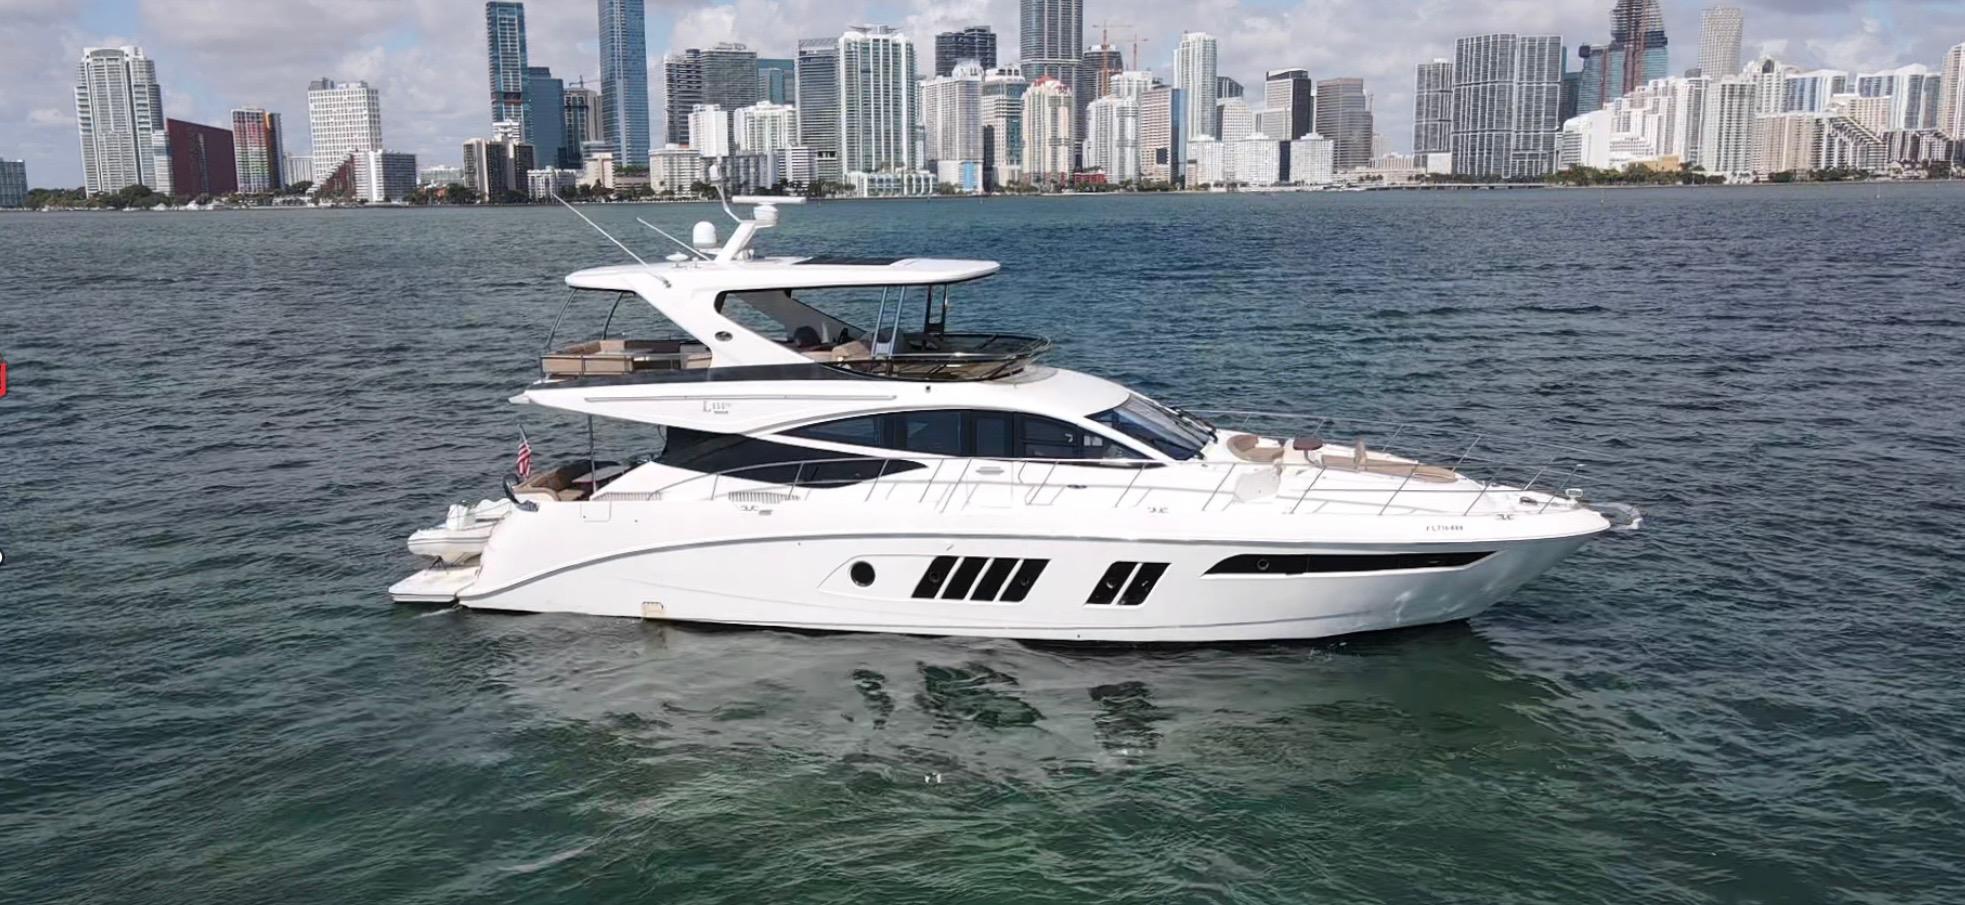 2016 Sea Ray L650 Fly Flybridge for sale - YachtWorld